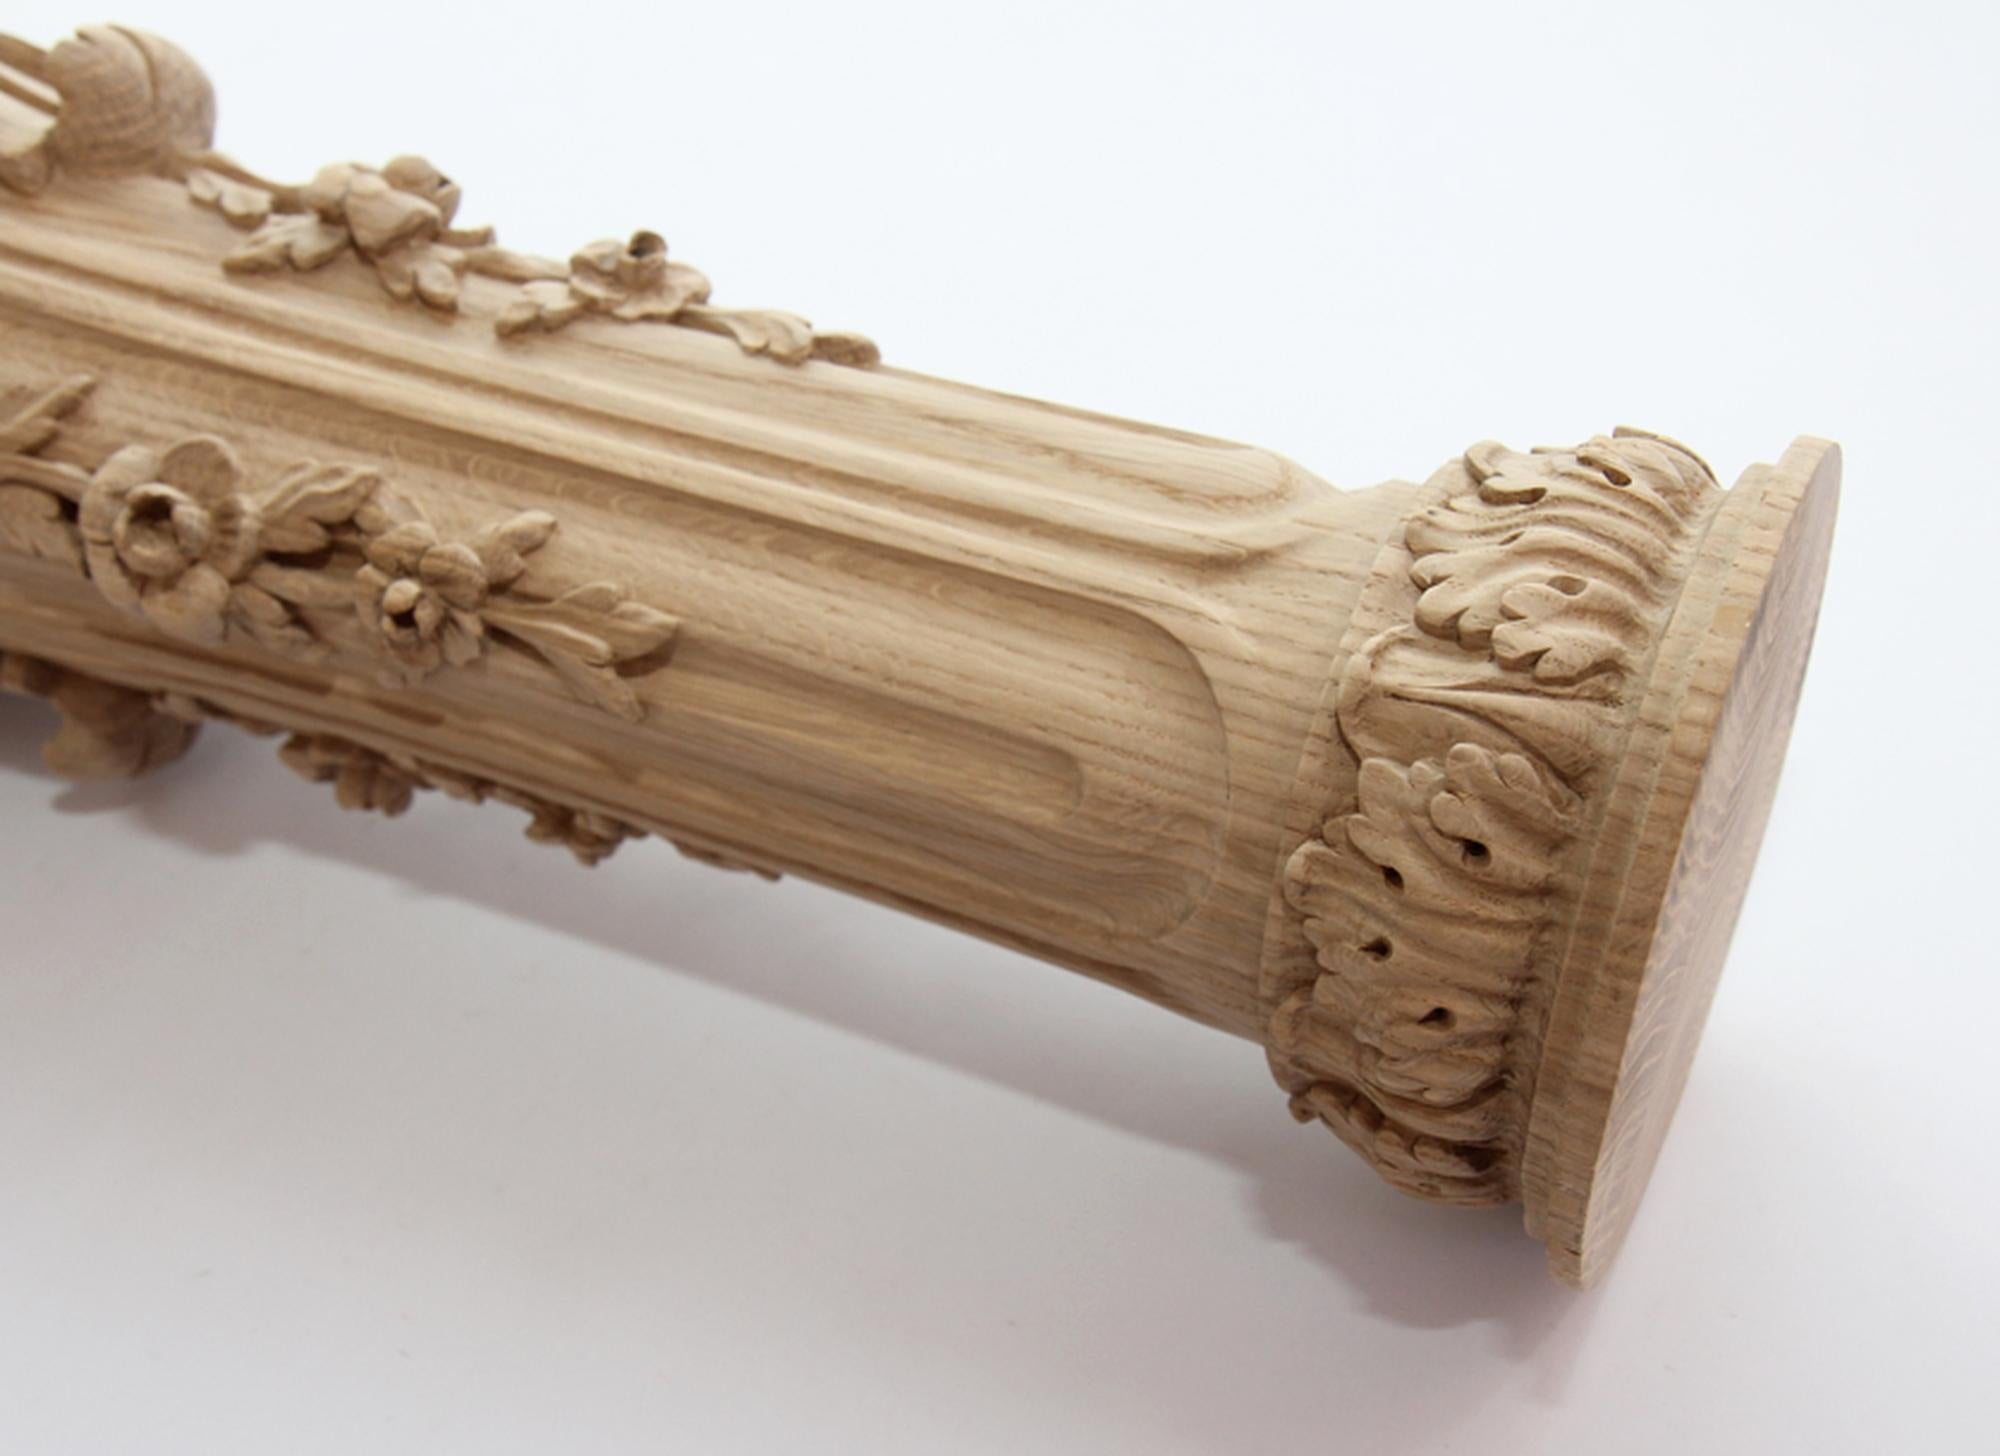 Unfinished High quality carved Newel Post from oak or beech of your choice.

>> SKU: L-017

>> Dimensions (A x B x d):

- 25.28